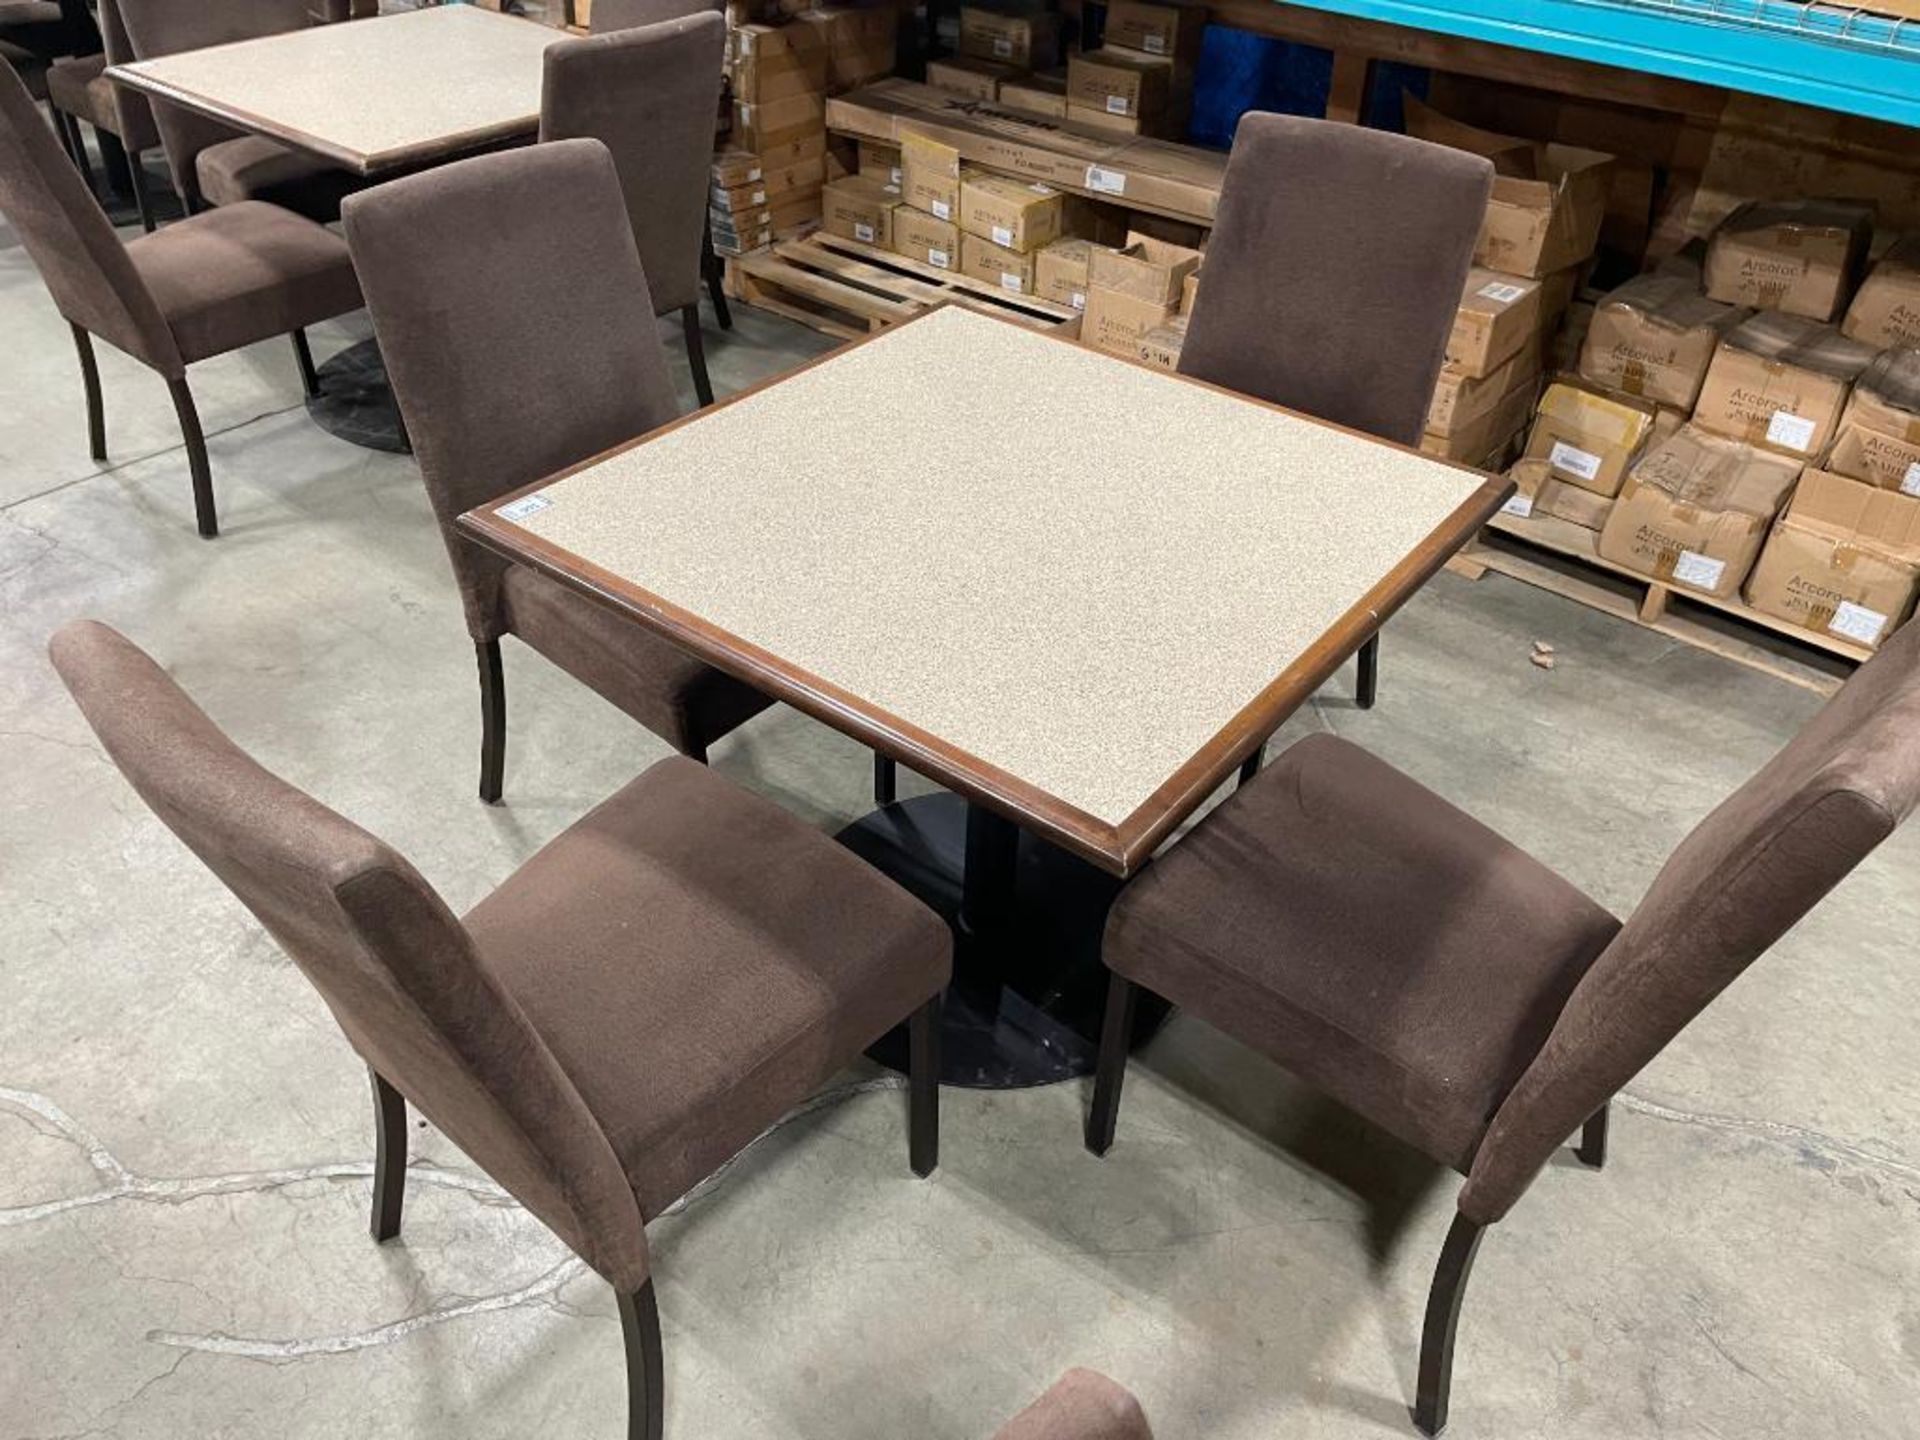 36" X 36" DINING TABLE WITH (4) MTS KILO DINING CHAIRS - Image 2 of 9